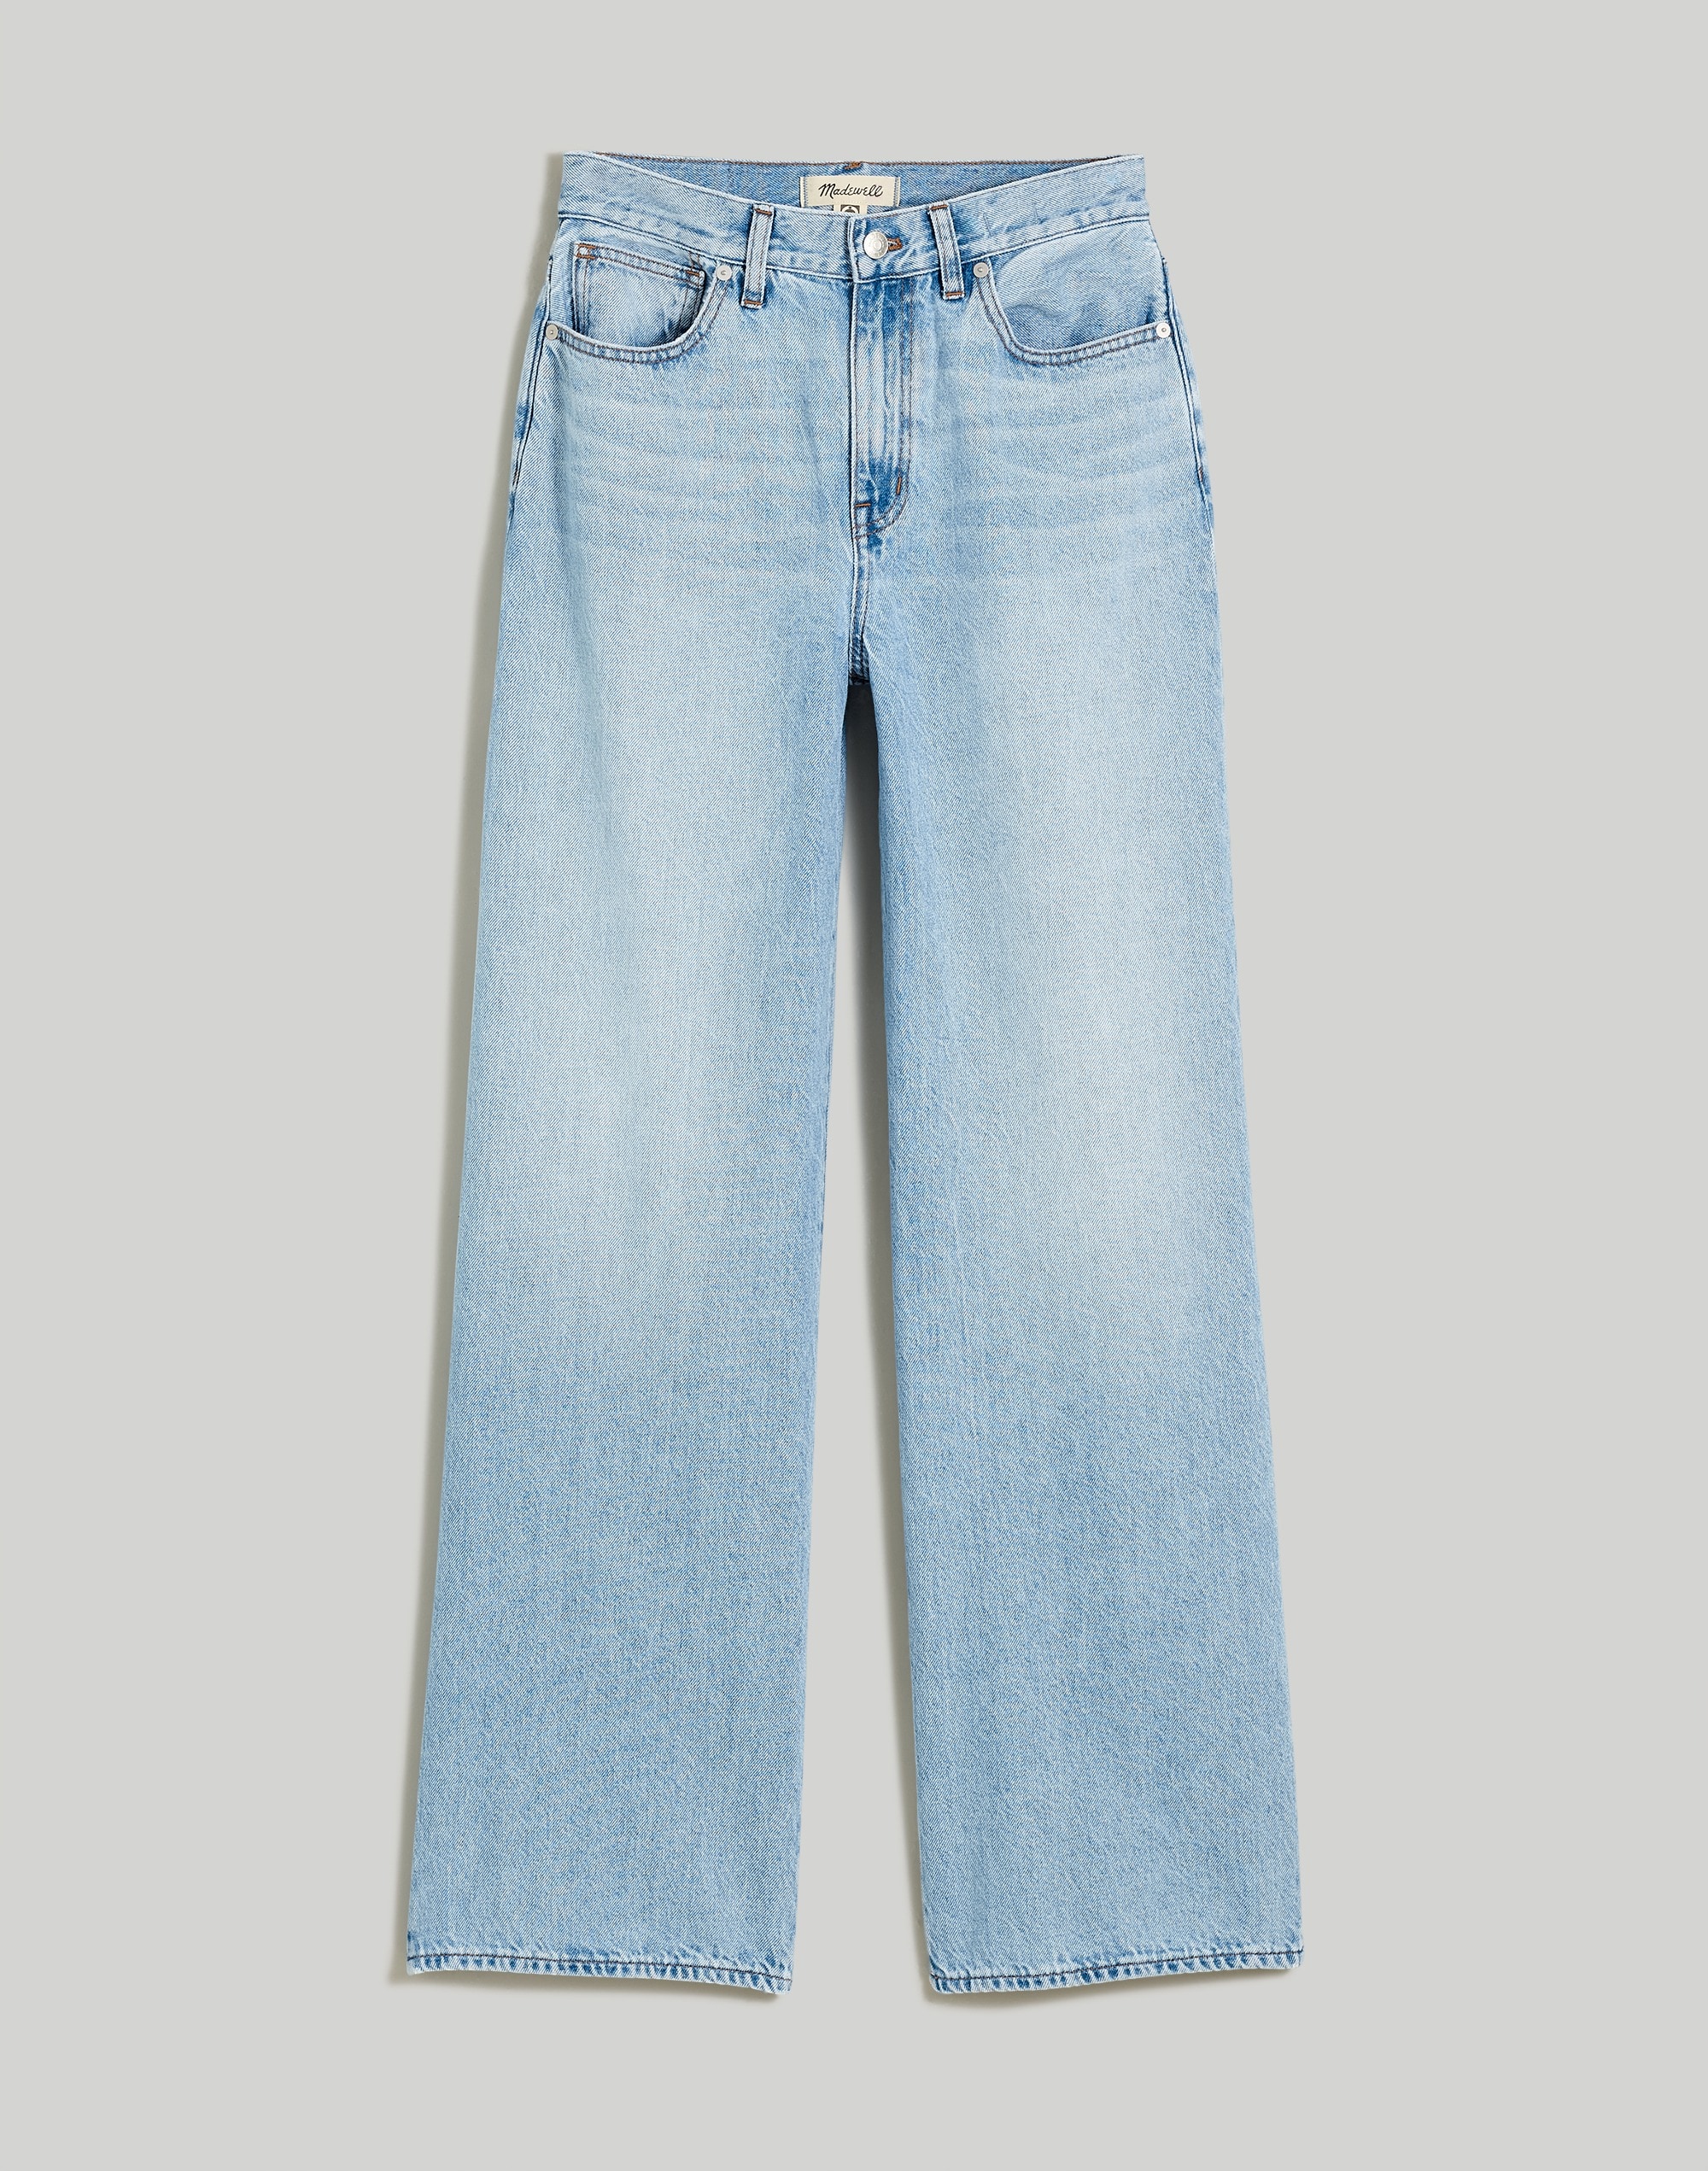 Plus Superwide-Leg Jeans in Ahern Wash: Airy Denim Edition